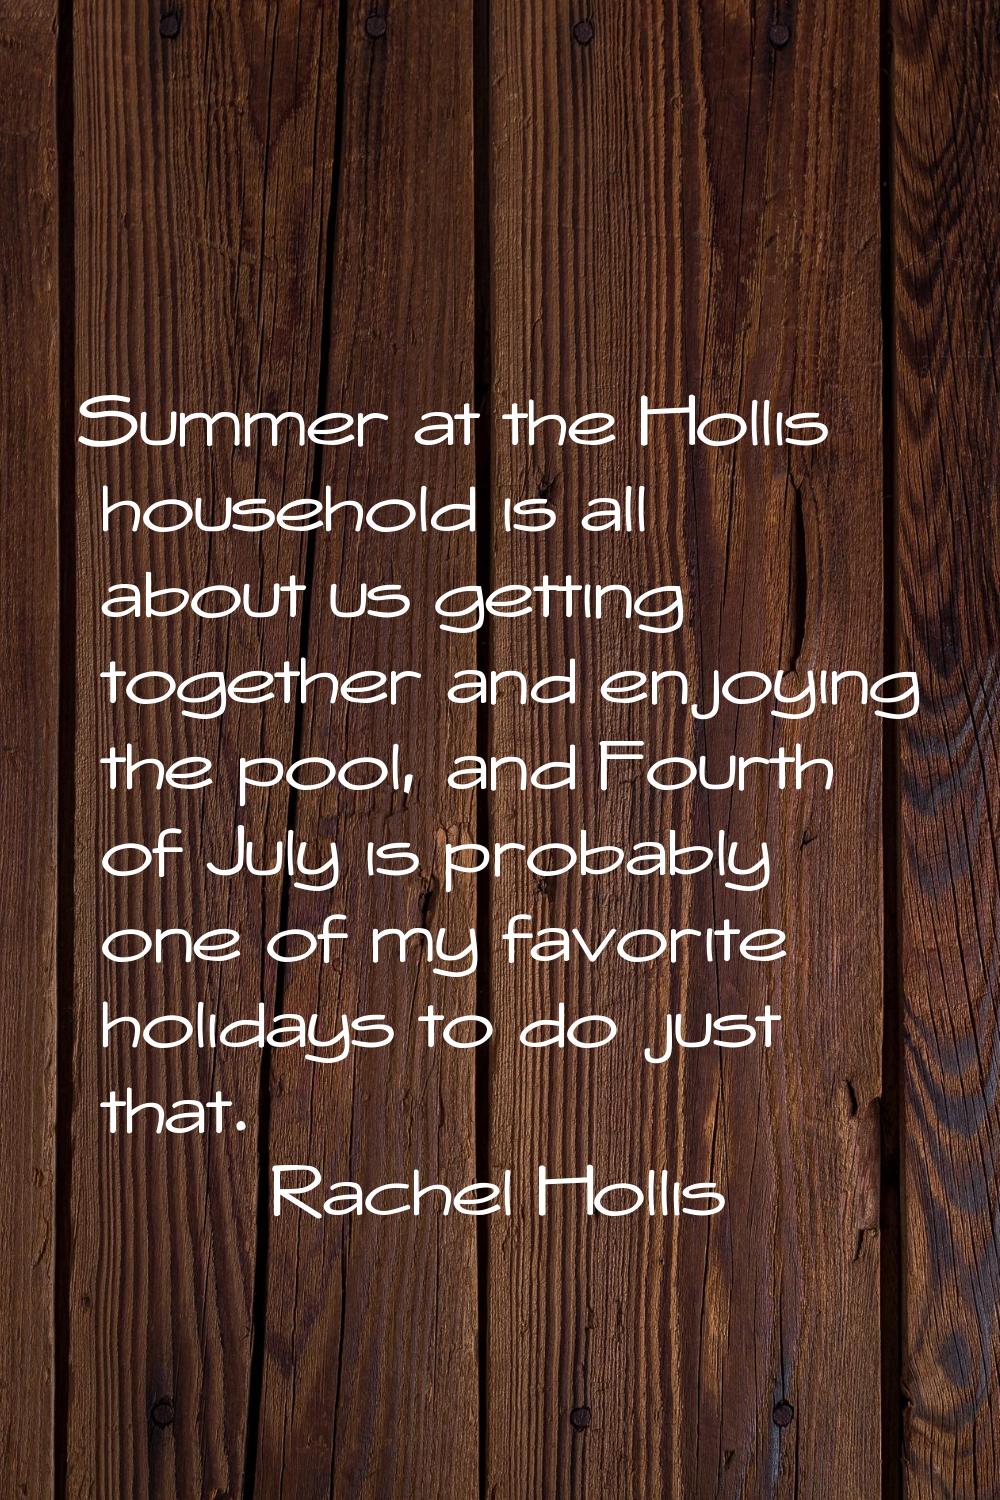 Summer at the Hollis household is all about us getting together and enjoying the pool, and Fourth o